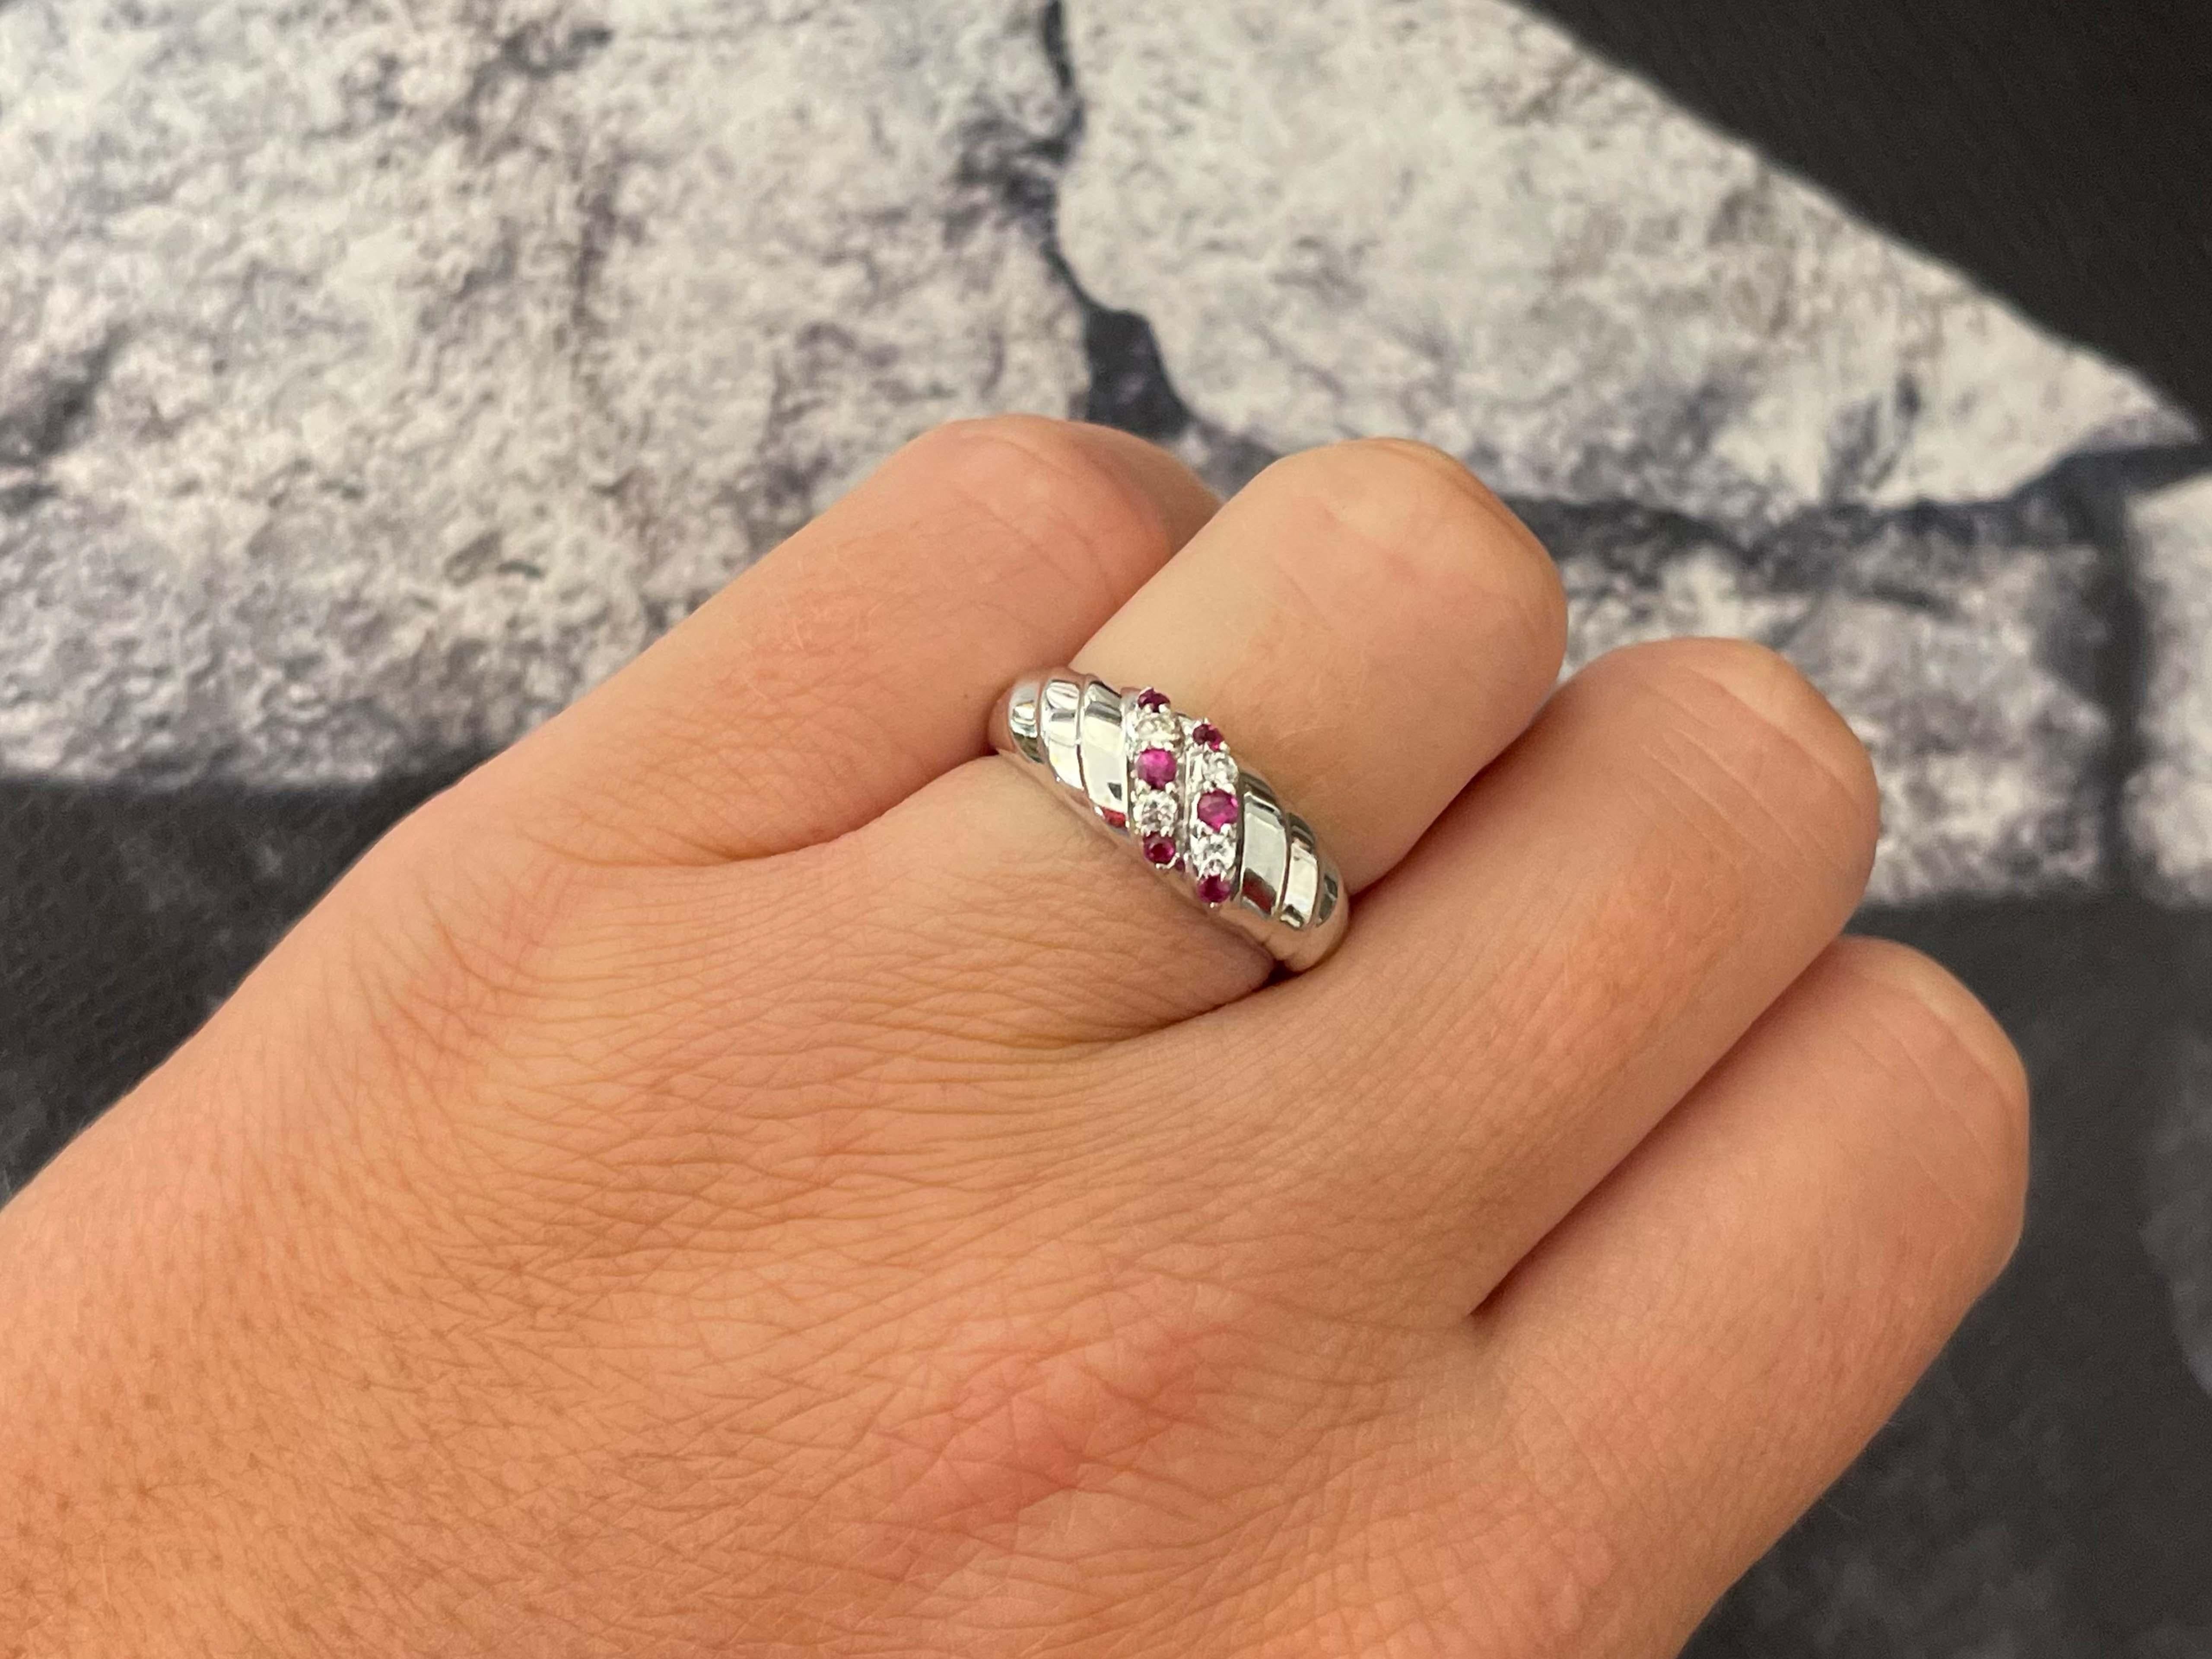 Item Specifications:

Metal: 14K White Gold

Style: Statement Ring

Ring Size: 6.5 (resizing available for a fee)

Total Weight: 3.5 Grams

Gemstone Specifications:

Gemstones: 4 red rubies

Ruby Carat Weight: 0.10 carats

Diamond Carat Weight: 0.10